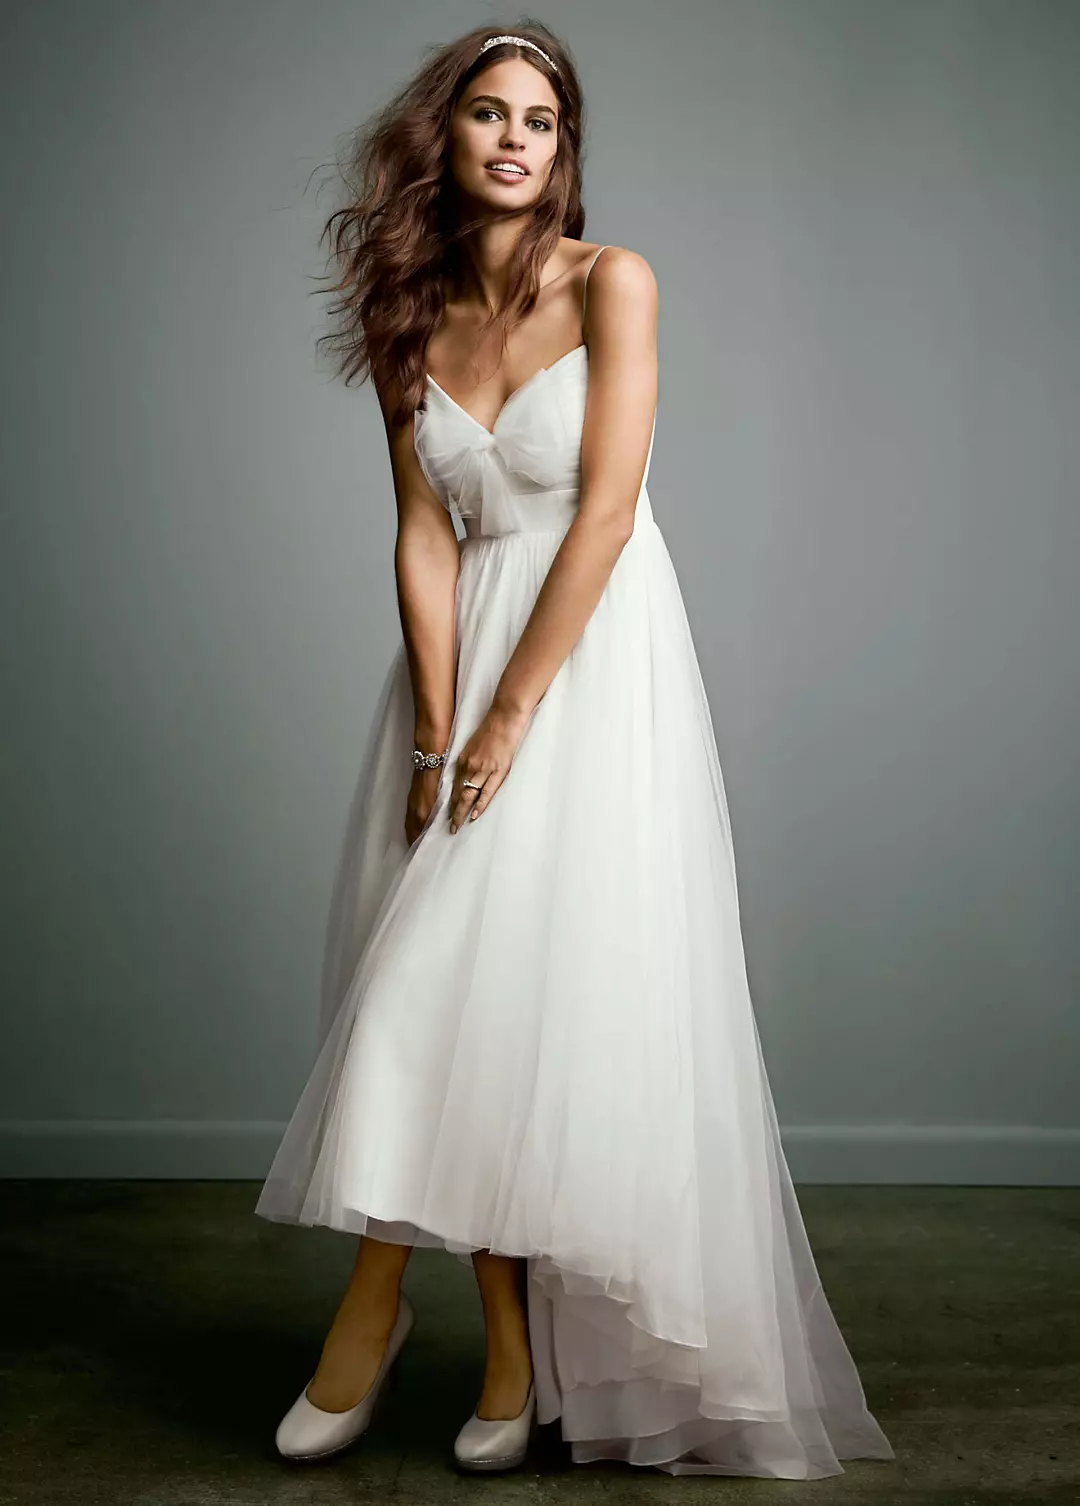 Tulle Over Chiffon High Low Dress with Bow Accent  Image